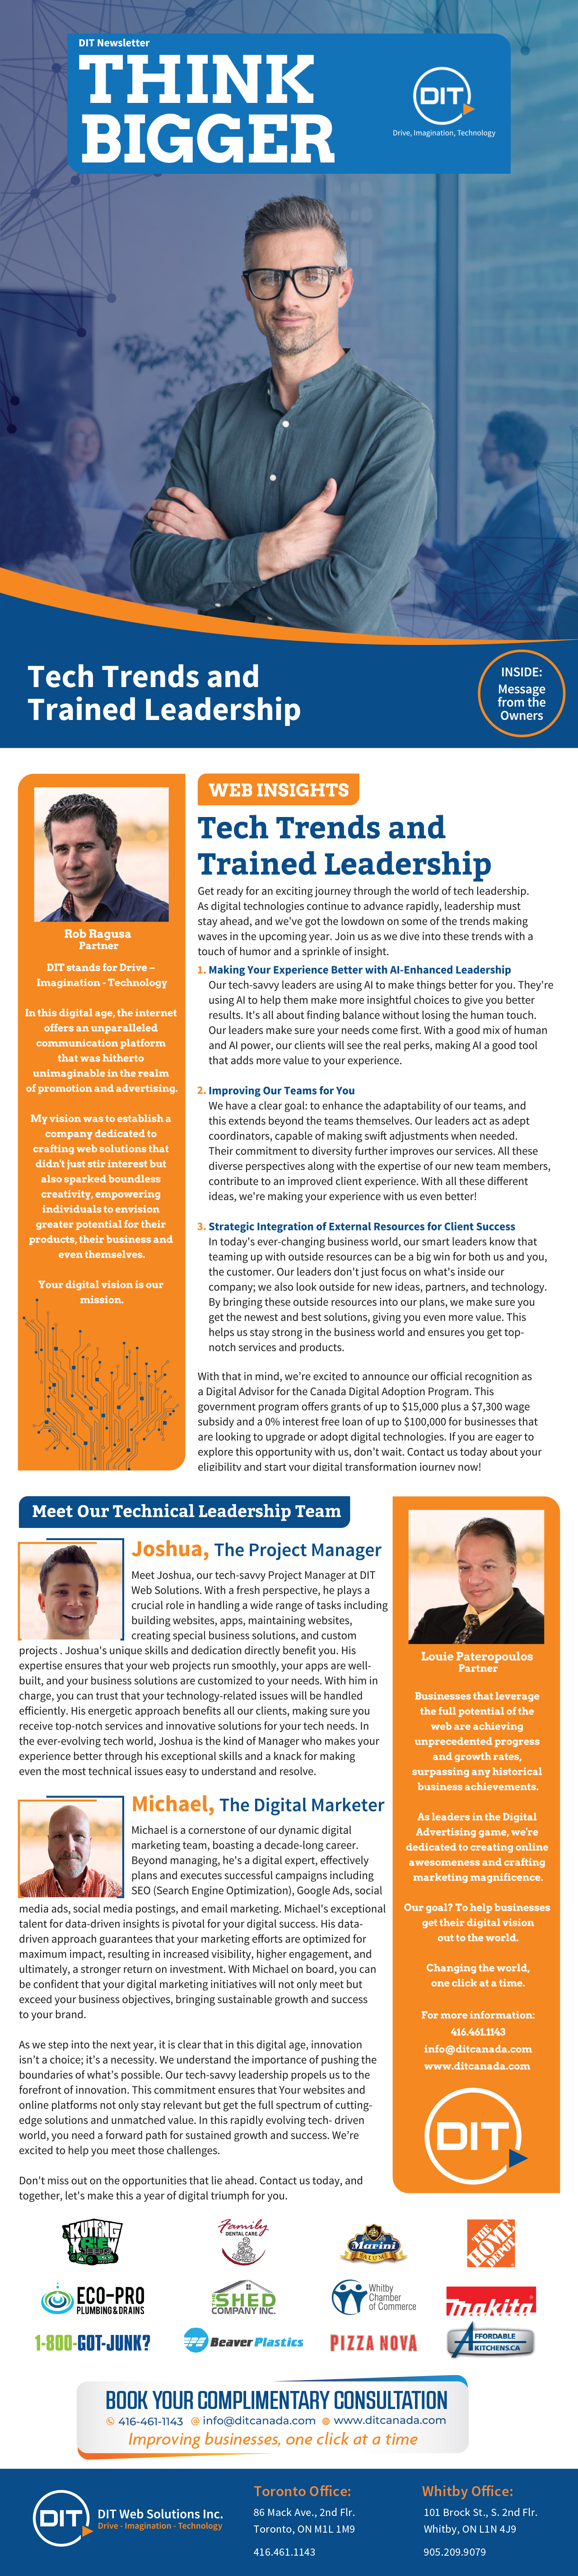 Tech Trends and Trained Leadership